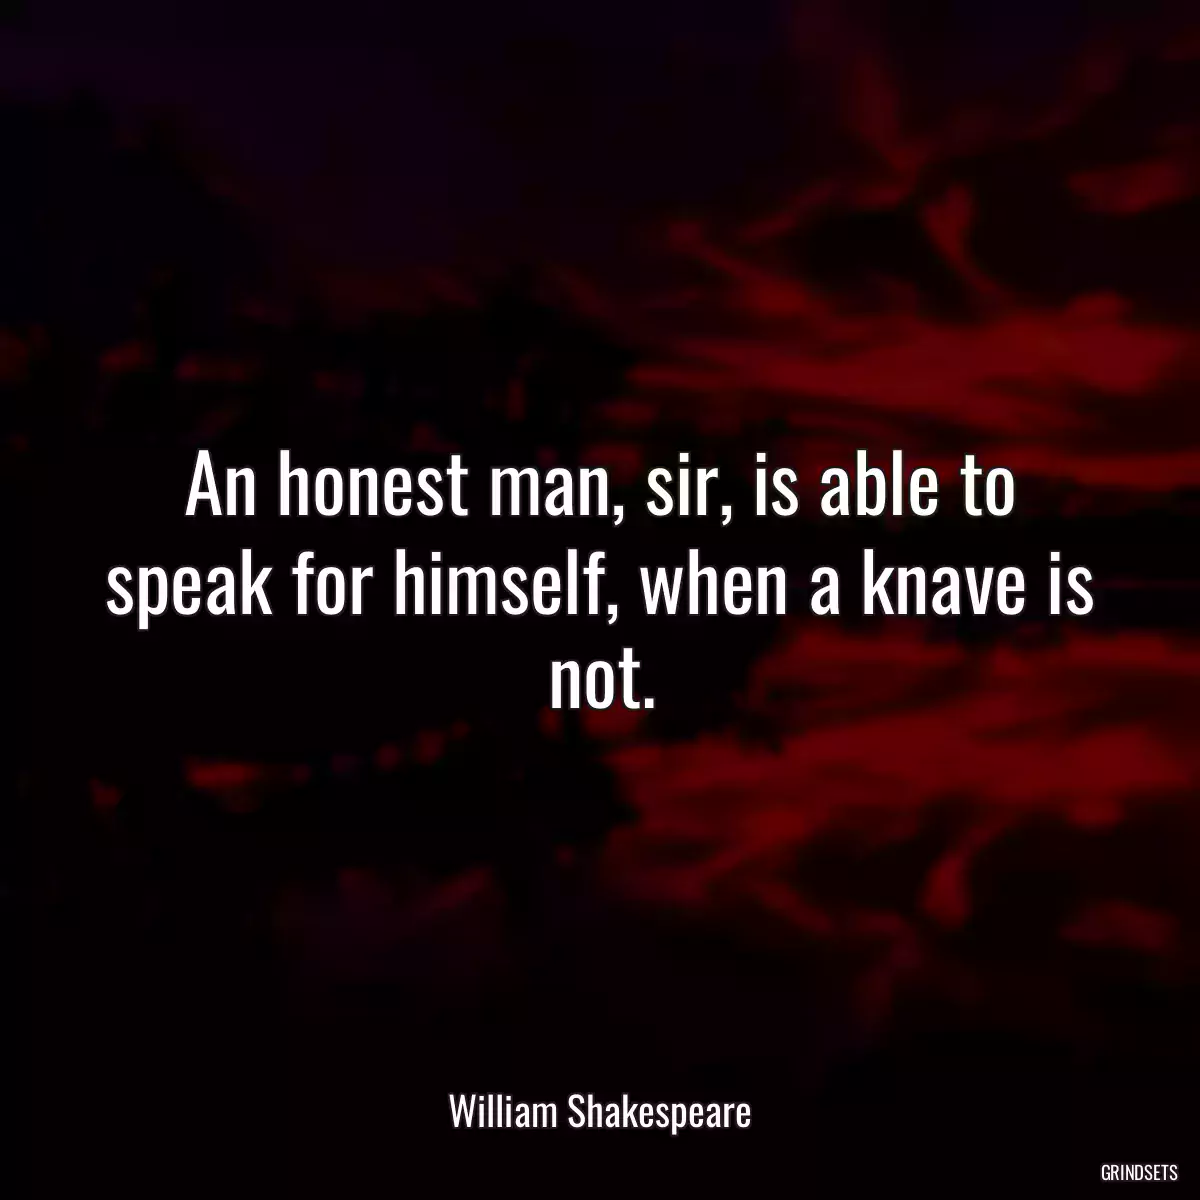 An honest man, sir, is able to speak for himself, when a knave is not.